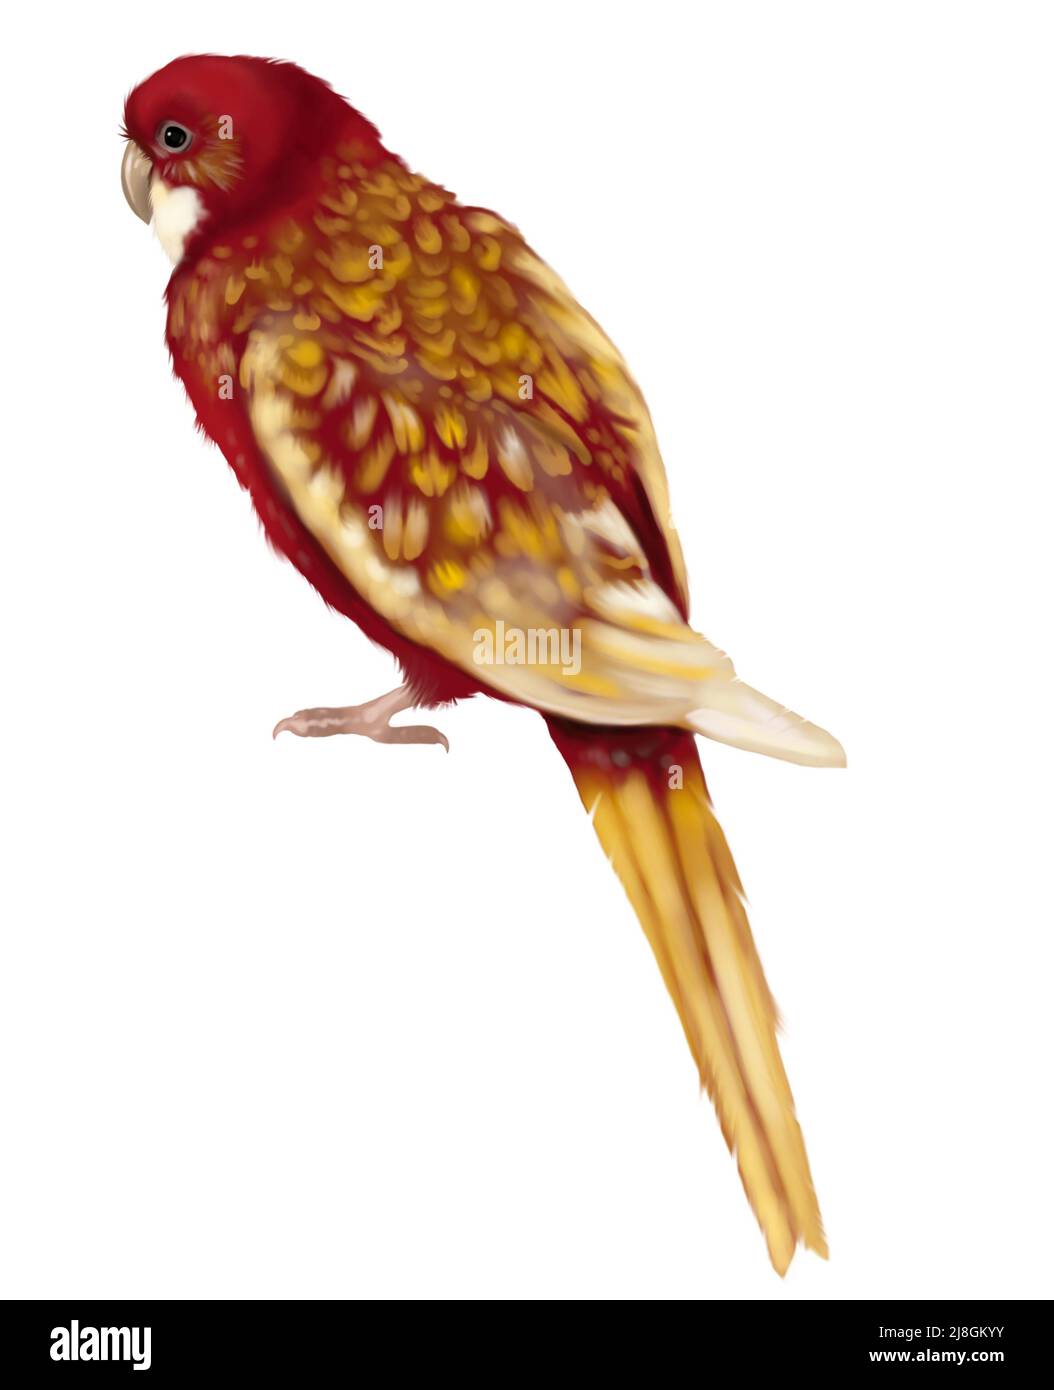 watercolor bird. Rosella red parrot. red-yellow parrot. Realistic illustration Stock Photo